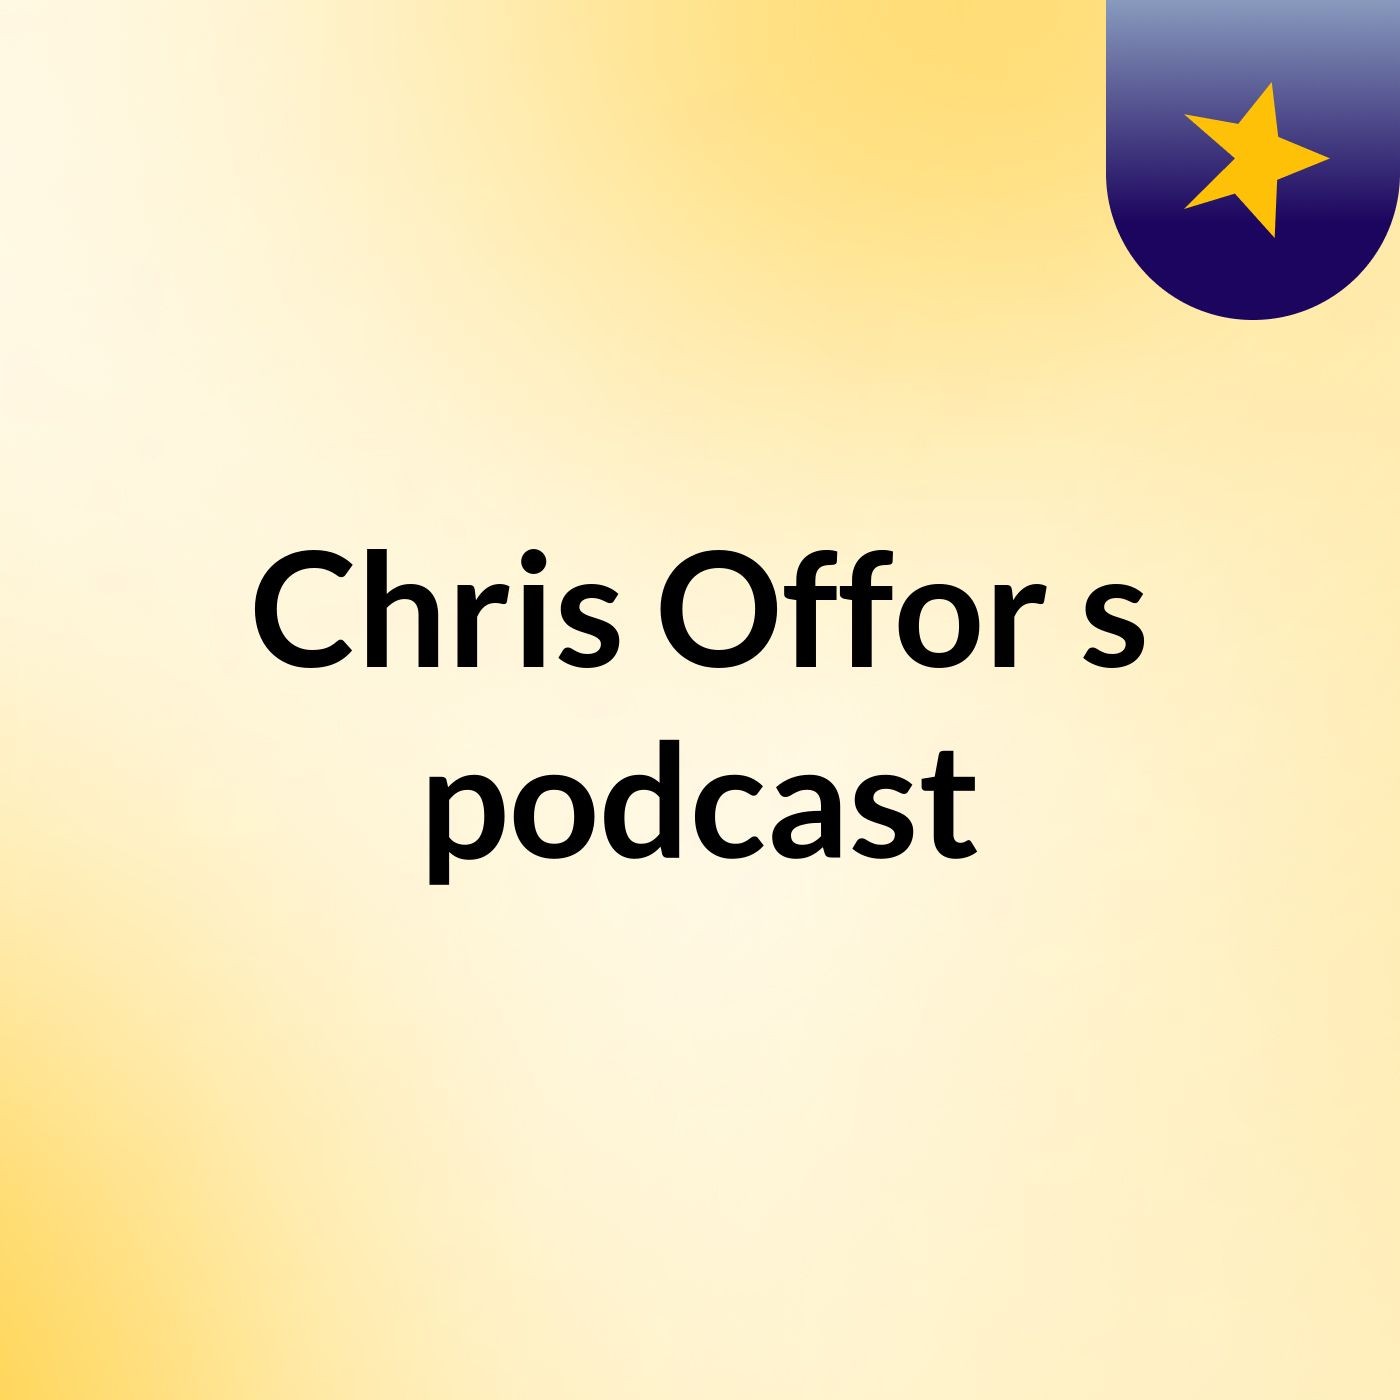 Chris Offor's podcast